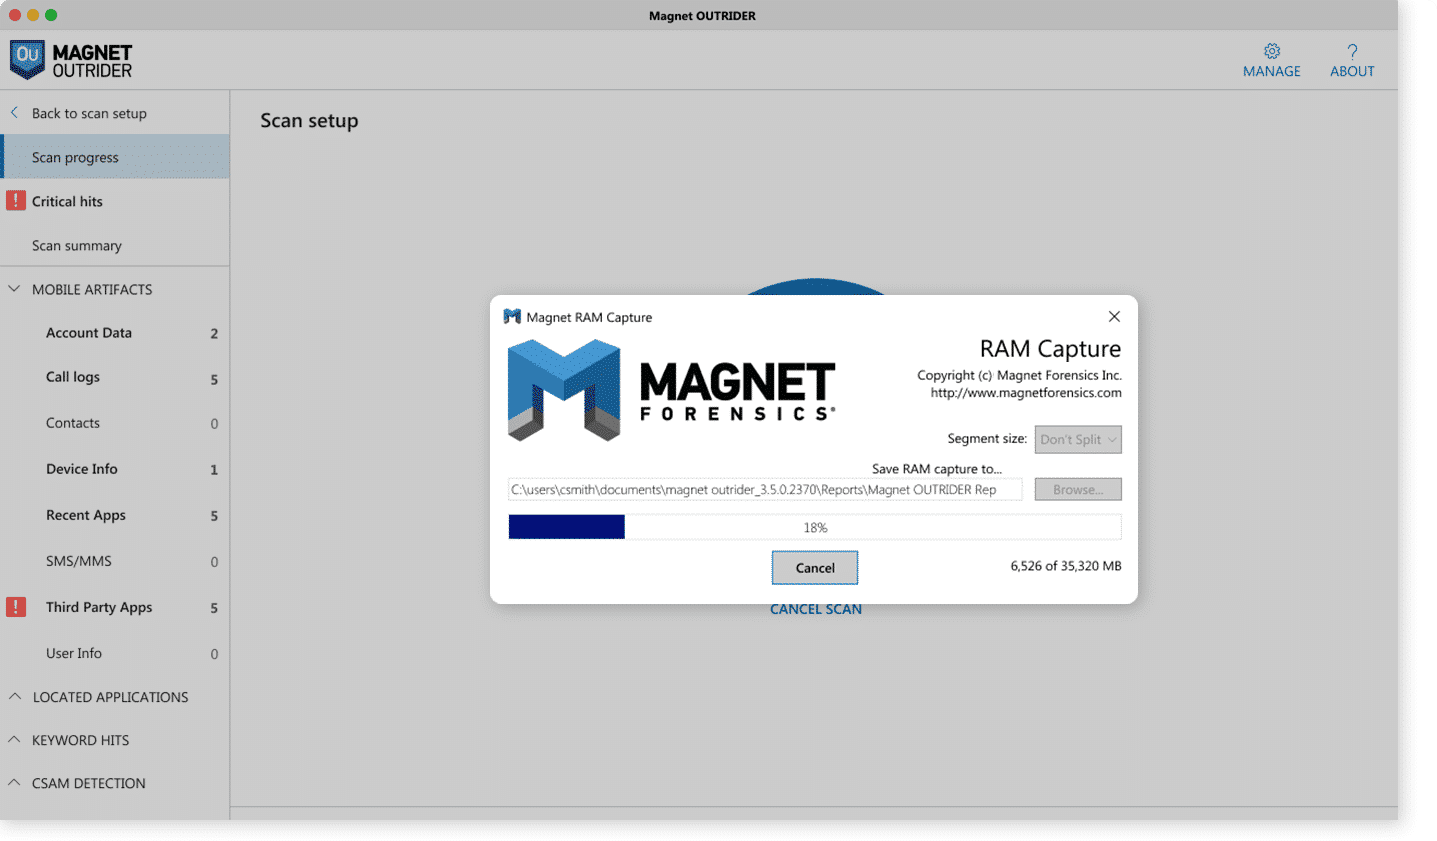 Magnet OUTRIDER product screen